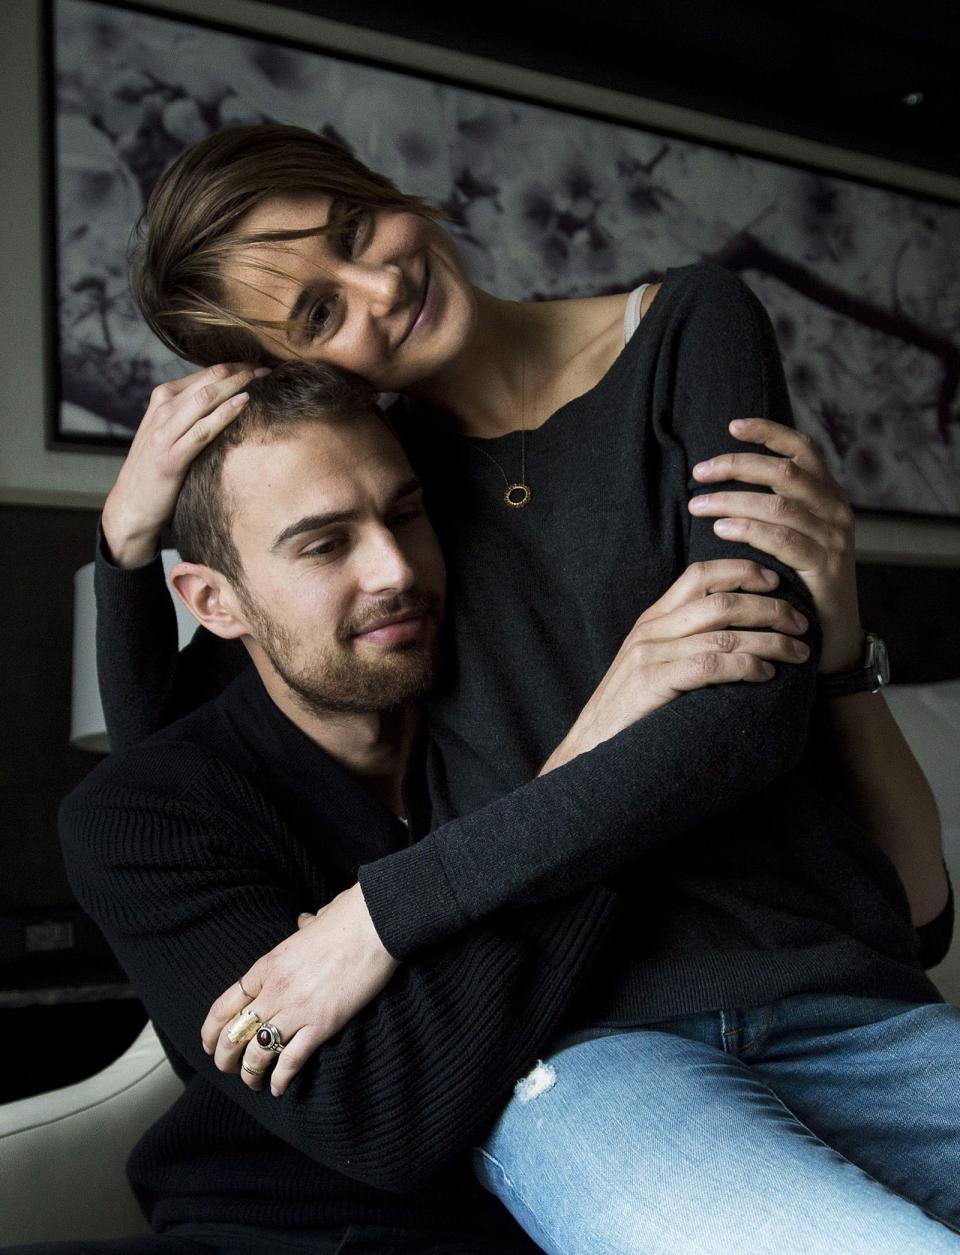 In this Thursday, March 6, 2014 file photo, actors Theo James, left, and Shailene Woodley pose for a photograph as they promote the movie "Divergent," in Toronto. The 22-year-old “Divergent” star gives hearty embraces often more than one - to everyone she meets. Woodley and James star in the anticipated first film in the young adult trilogy by author Veronica Roth. (AP Photo/The Canadian Press, Nathan Denette, file)